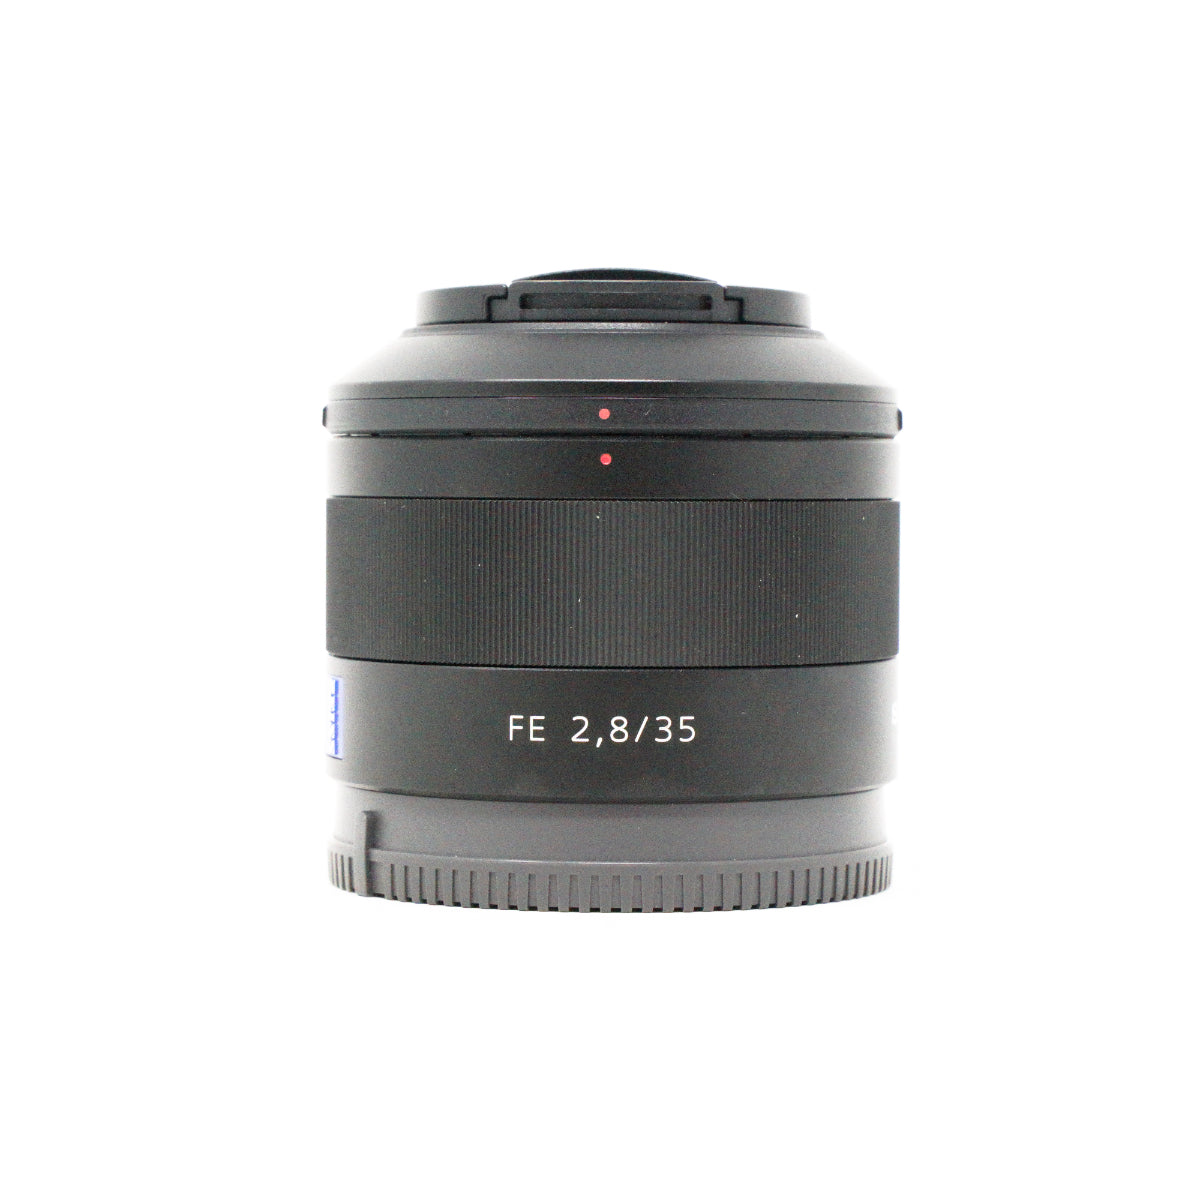 USED Sony 35mm F2.8 Zeiss Prime Lens